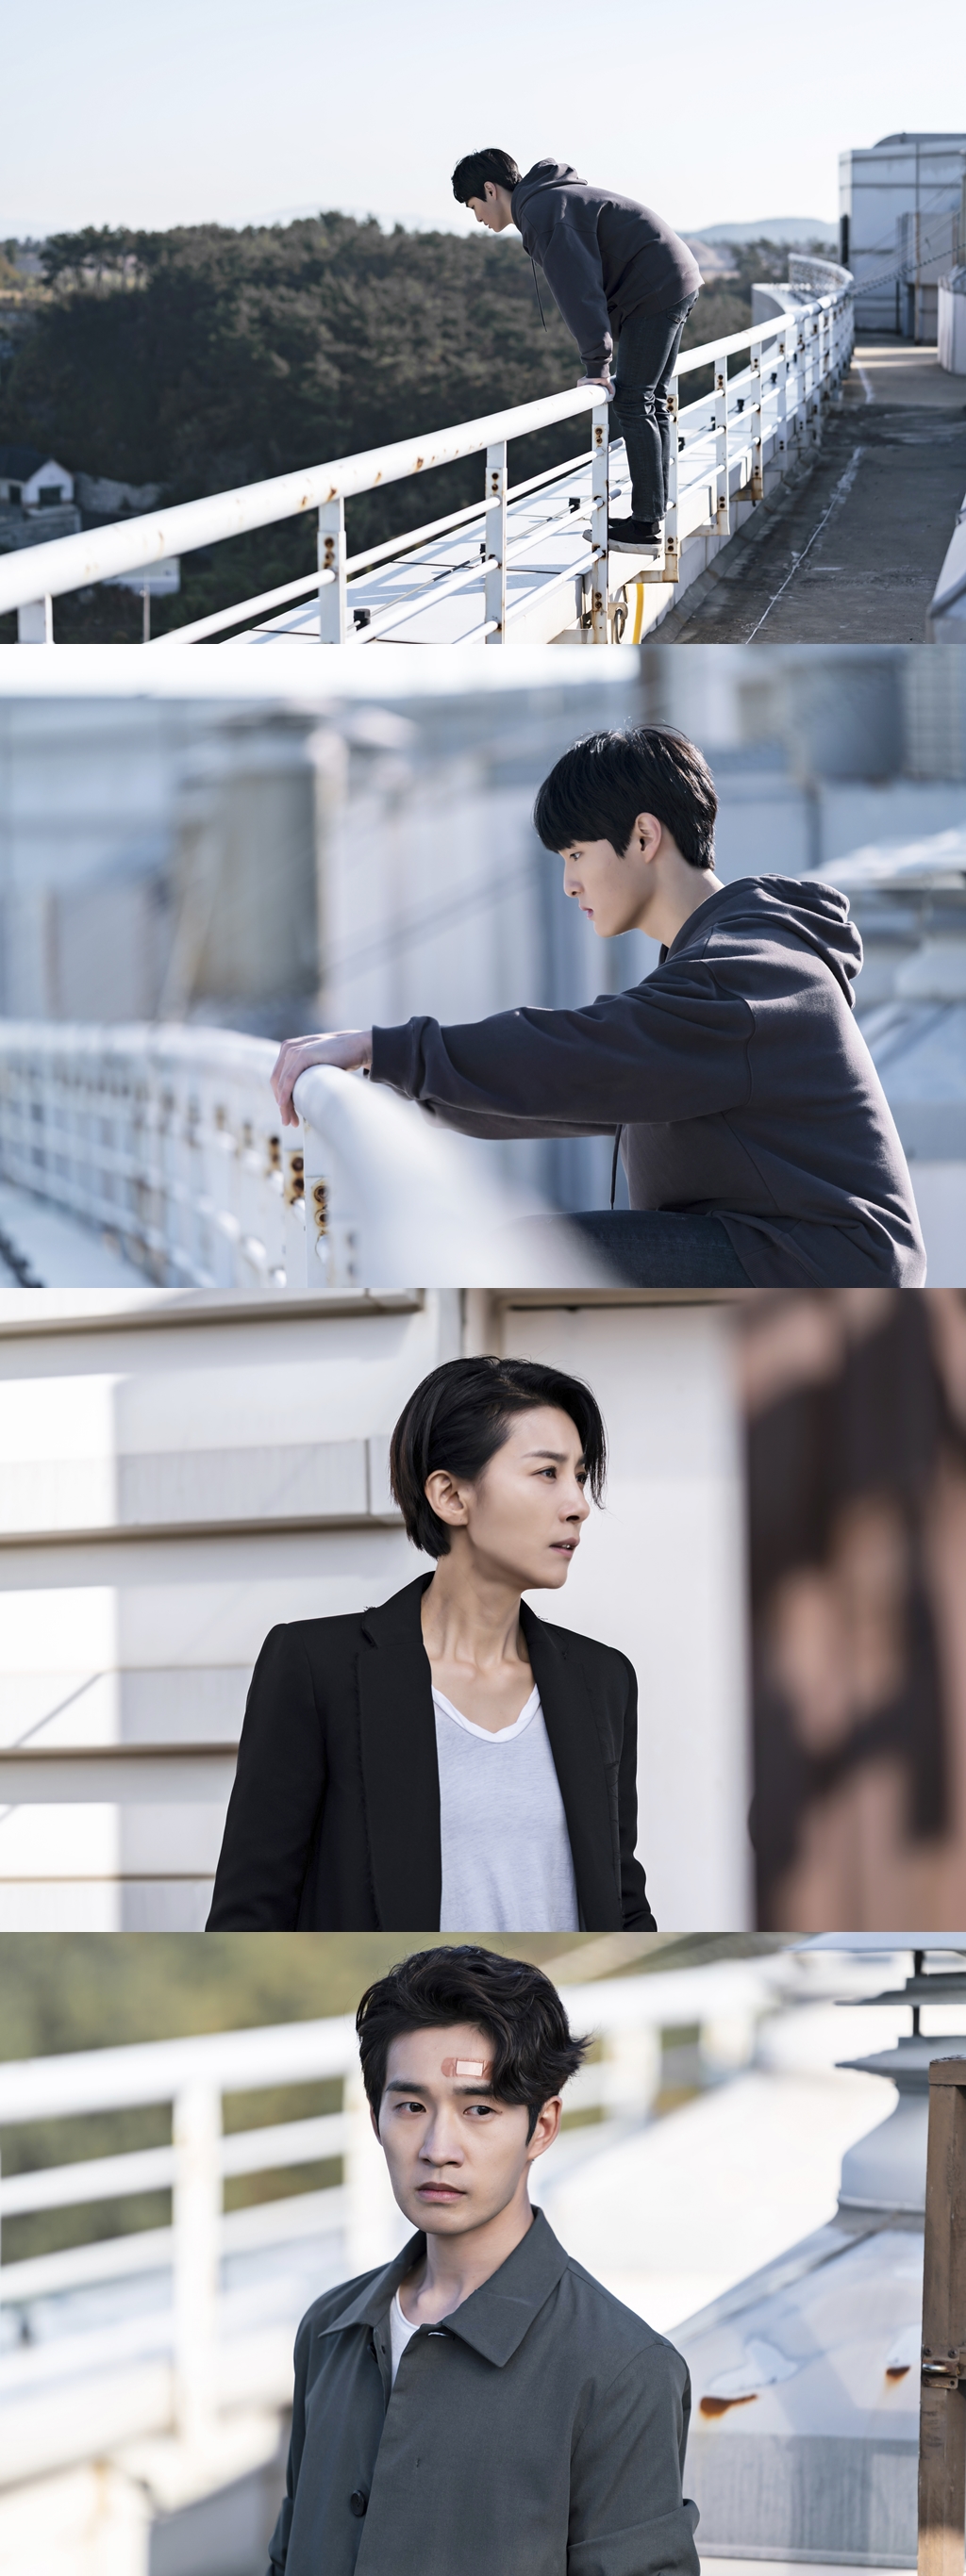 Yoon Chan-young stood on the roof railing. Can Kim Seo-hyung and Ryu Deok-hwan hold the Boy?SBS Nobody Knows will reveal the images of Joo Dong-myung (Yoon Chan-young), Cha Young-jin (Kim Seo-hyung), and Lee Sun-woo (Ryu Deok-hwan), who visited the rooftop of the Millennium Hotel where Ko Eun-ho crashed ahead of the main broadcast on the 16th.As Ko Eun-ho did before the crash, the main name that rises on the roof railing and looks down causes anxiety.The atmosphere of two adults, Cha Young-jin and Lee Sun-woo, who appeared in the same place, is also unusual.I am curious about why she is so nervous that she is not so disturbed in the case.Lee Sun-woos sad expression also stimulates curiosity: why is the alternative Boy standing on the roof railing? Is Ju Dong-myung going to fall like Ko Eun-ho?So can Cha Young-jin and Lee Sun-woo hold this Boy?Nobody knows, the production team said, In the fifth episode broadcast today (16th), the story of Cha Young-jin and Lee Sun-woo, who are digging deeper, is drawn in connection with the Boys fall.In this process, another Boy, Ju Dongmyeong, will emerge as an important person. He will leave a heavy Message that no one else thought of.iMBC Cha Hye-mi  Photos